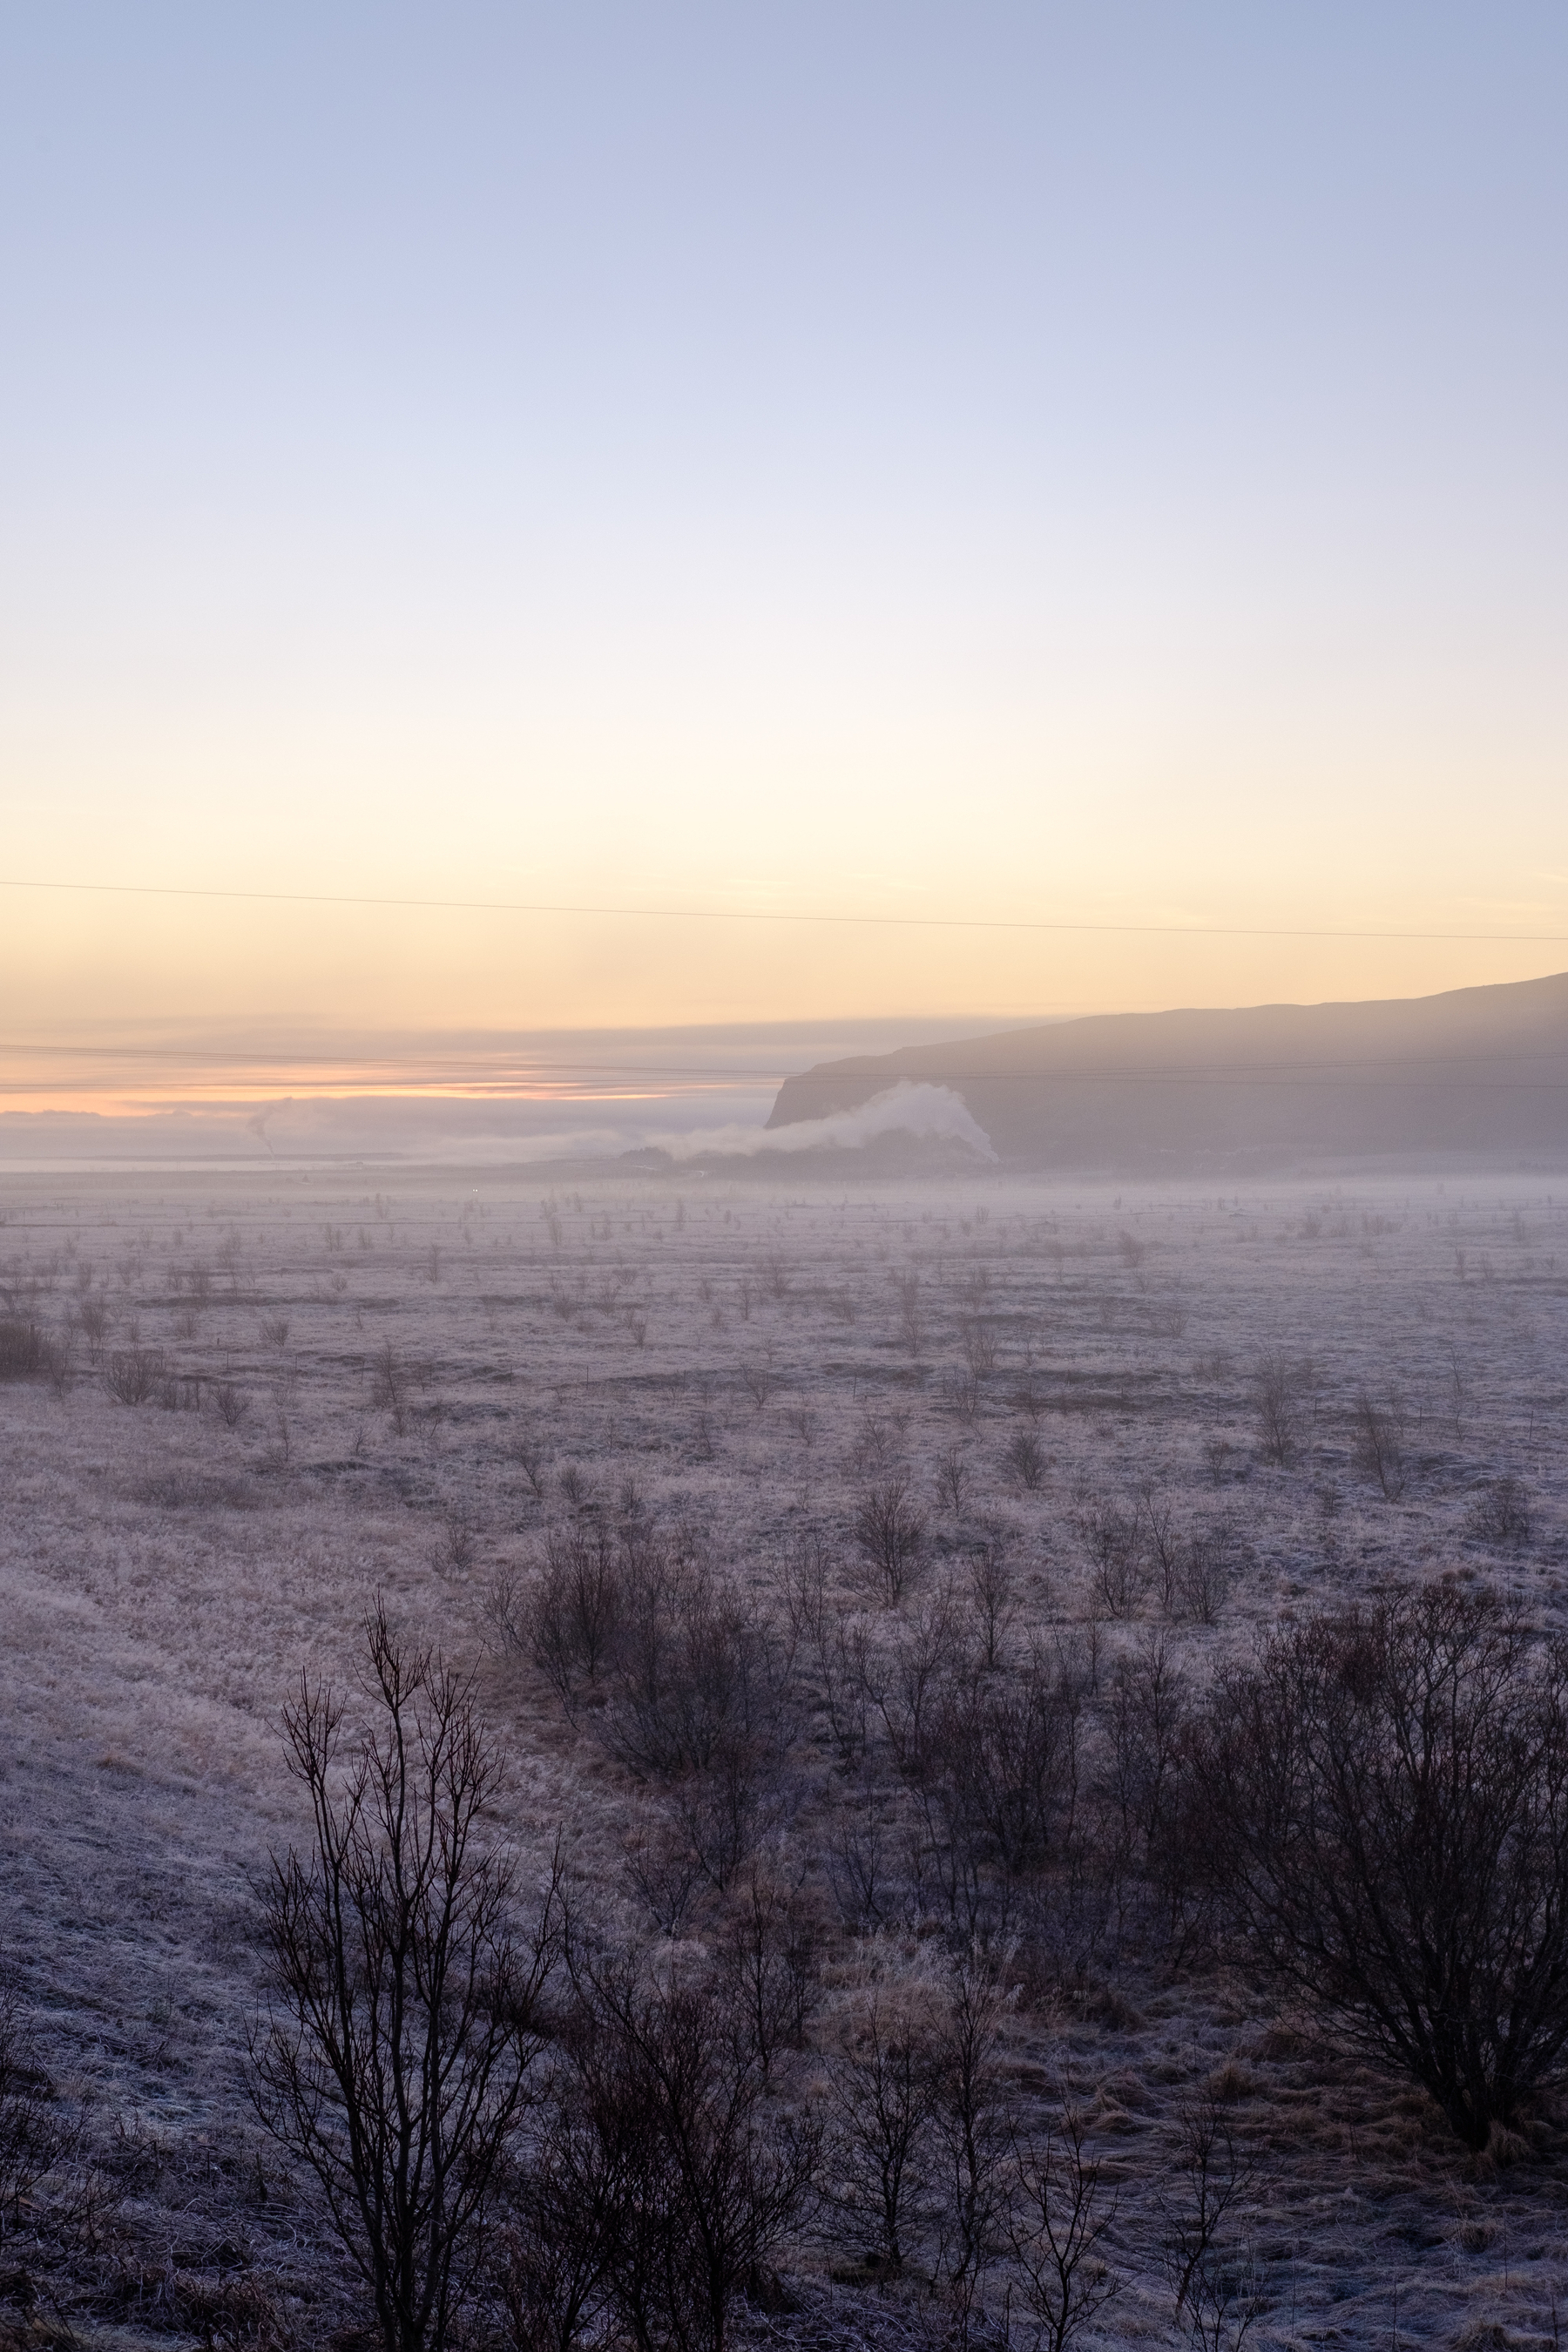 A view of steam rising from a geothermal area in the distance. Frost covers the ground